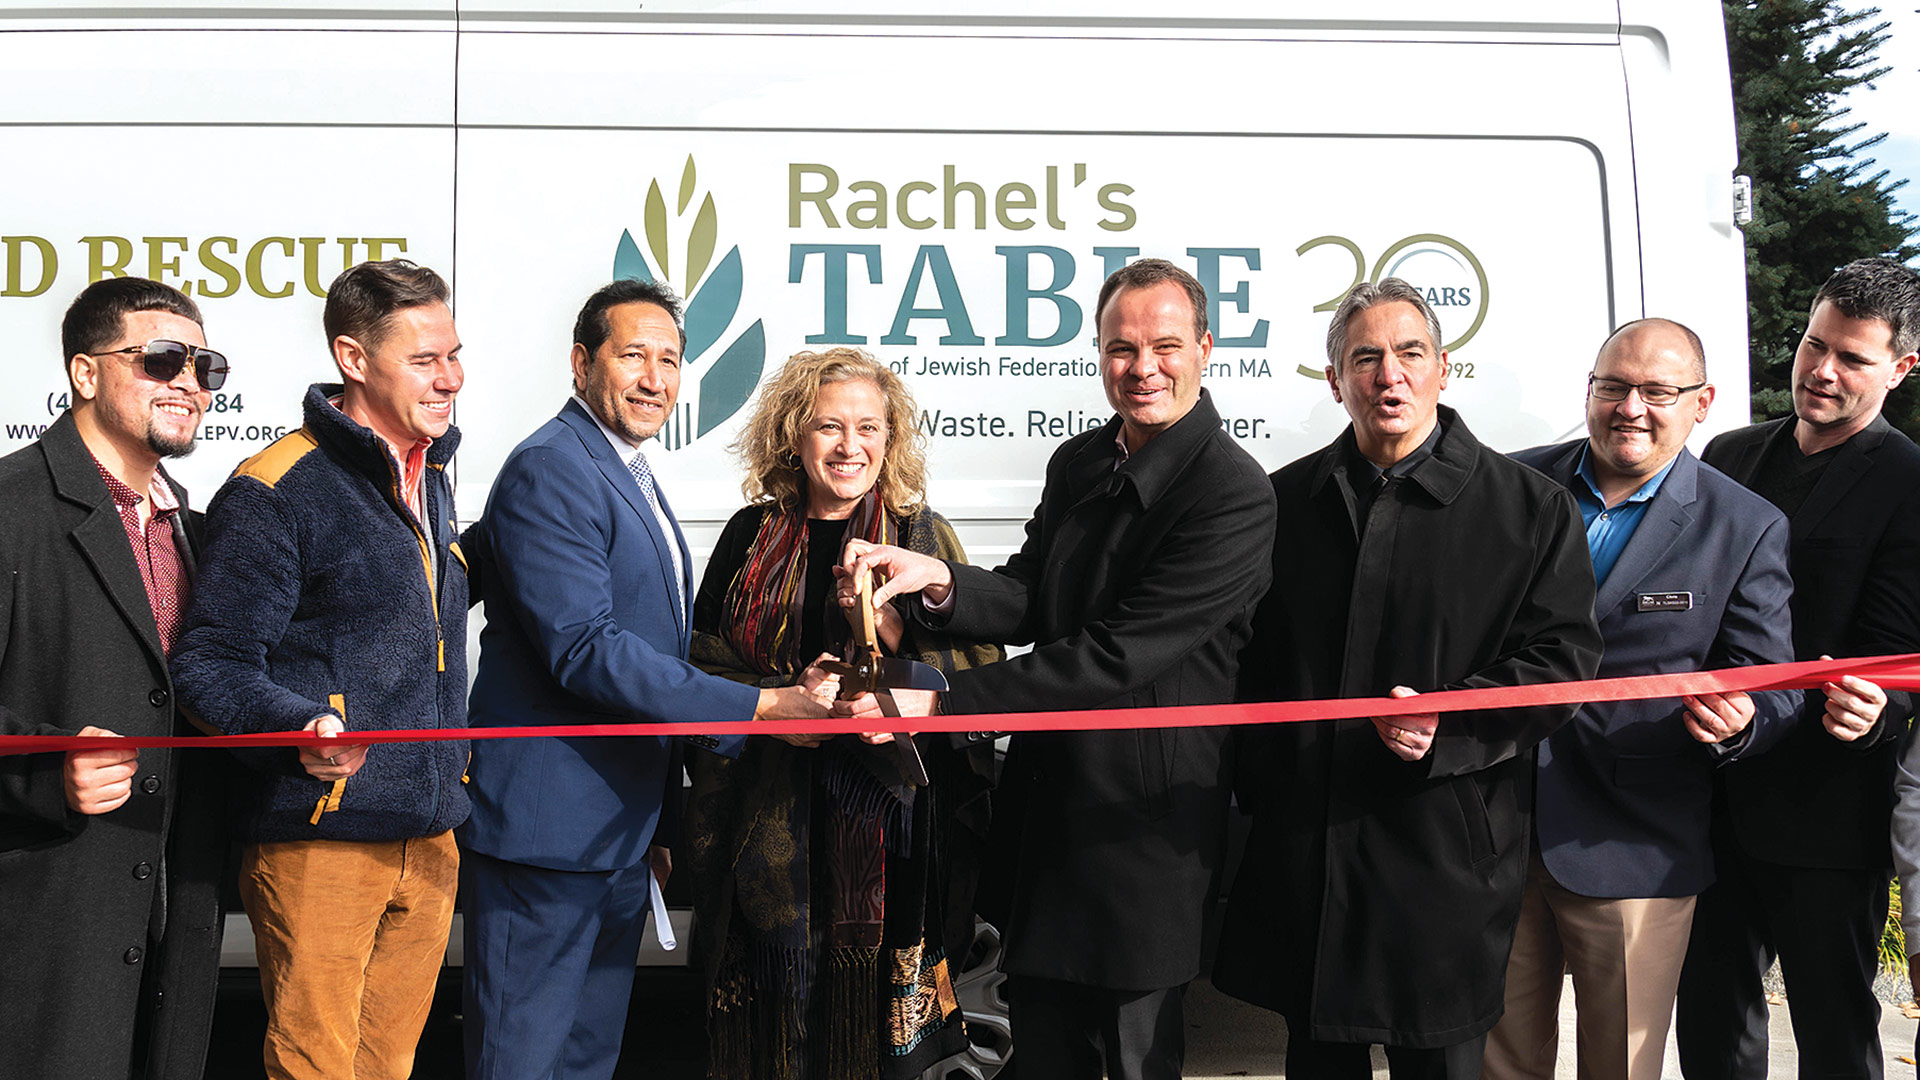 Pictured, from left: Armando Oliveras from state Sen. Adam Gomez’s office, state Reps. Jacob Oliveira and Carlos Gonzalez, Rachel’s Table Director Jodi Falk, Lesser, Springfield Mayor Domenic Sarno, MGM Springfield Executive Director of Hospitality Chris Smigel, and MGM Springfield President Chris Kelley.